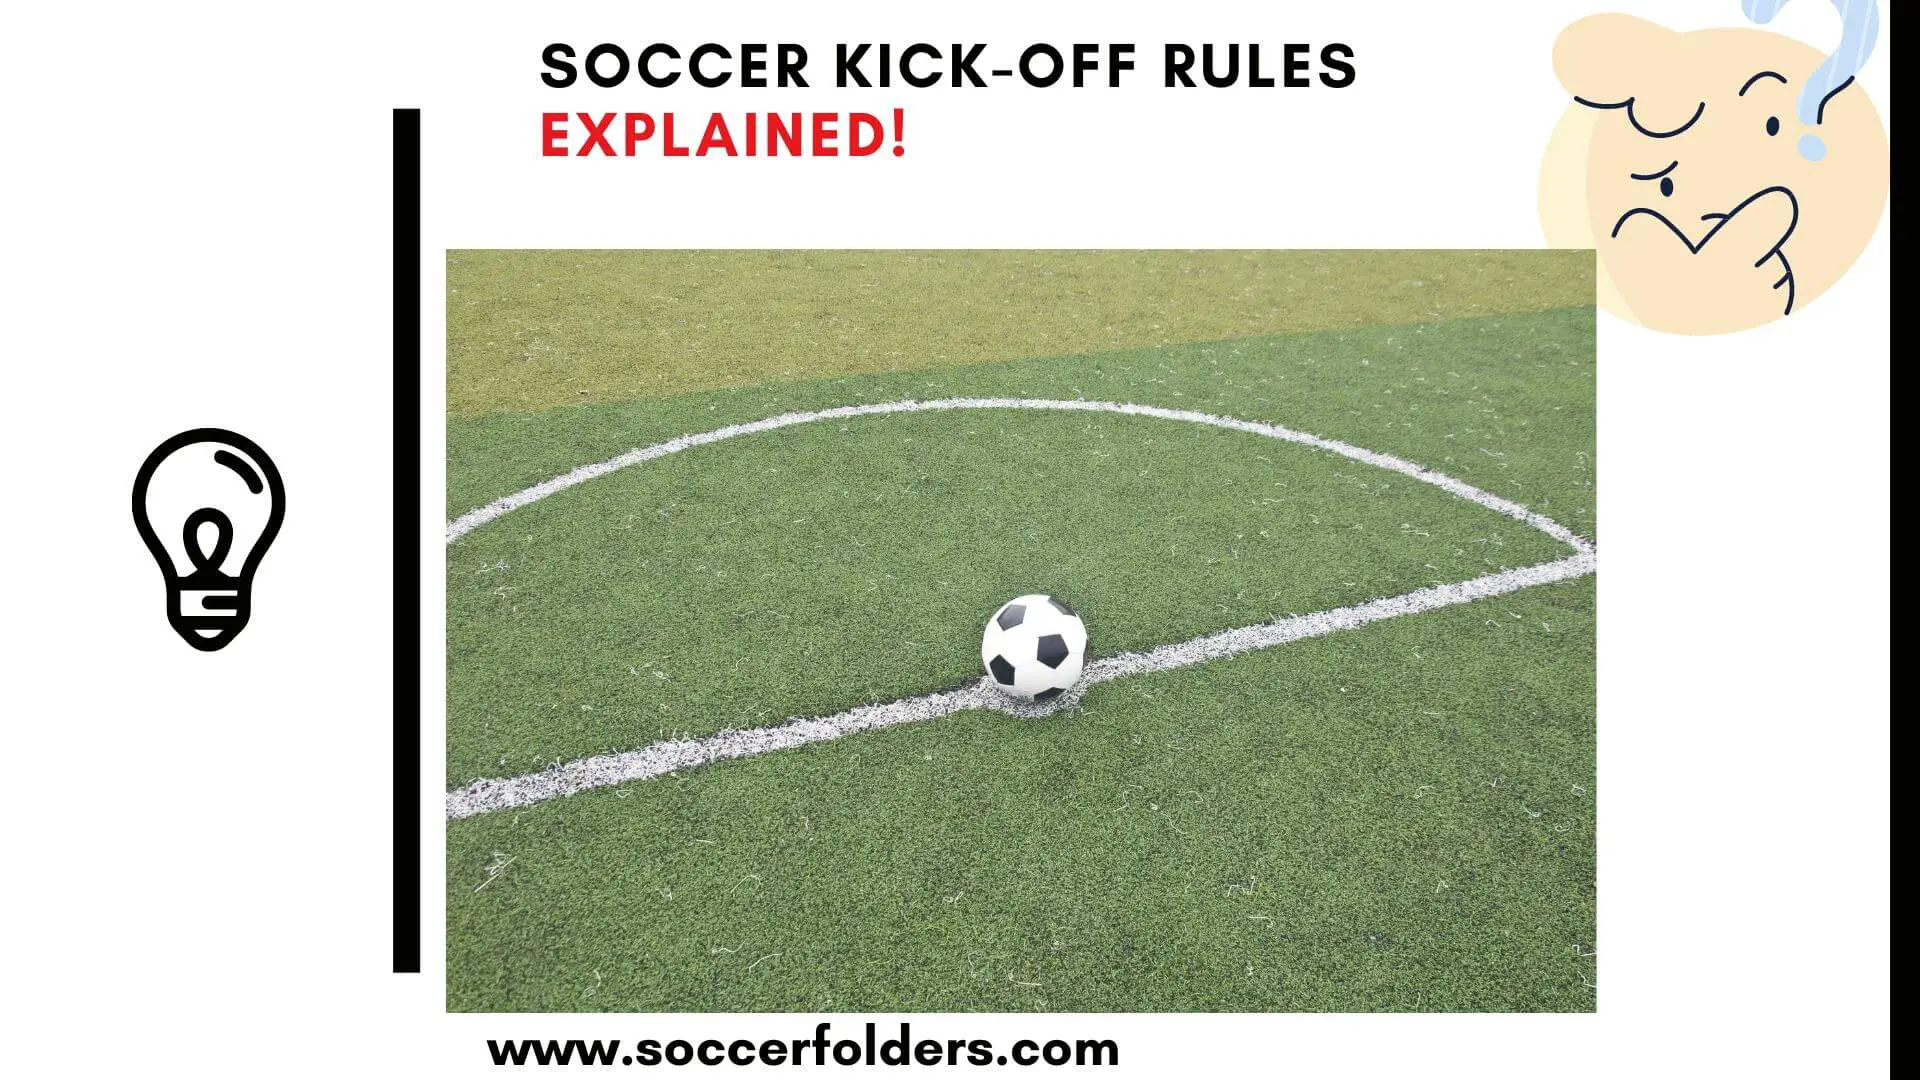 Soccer kick off rules - Featured image